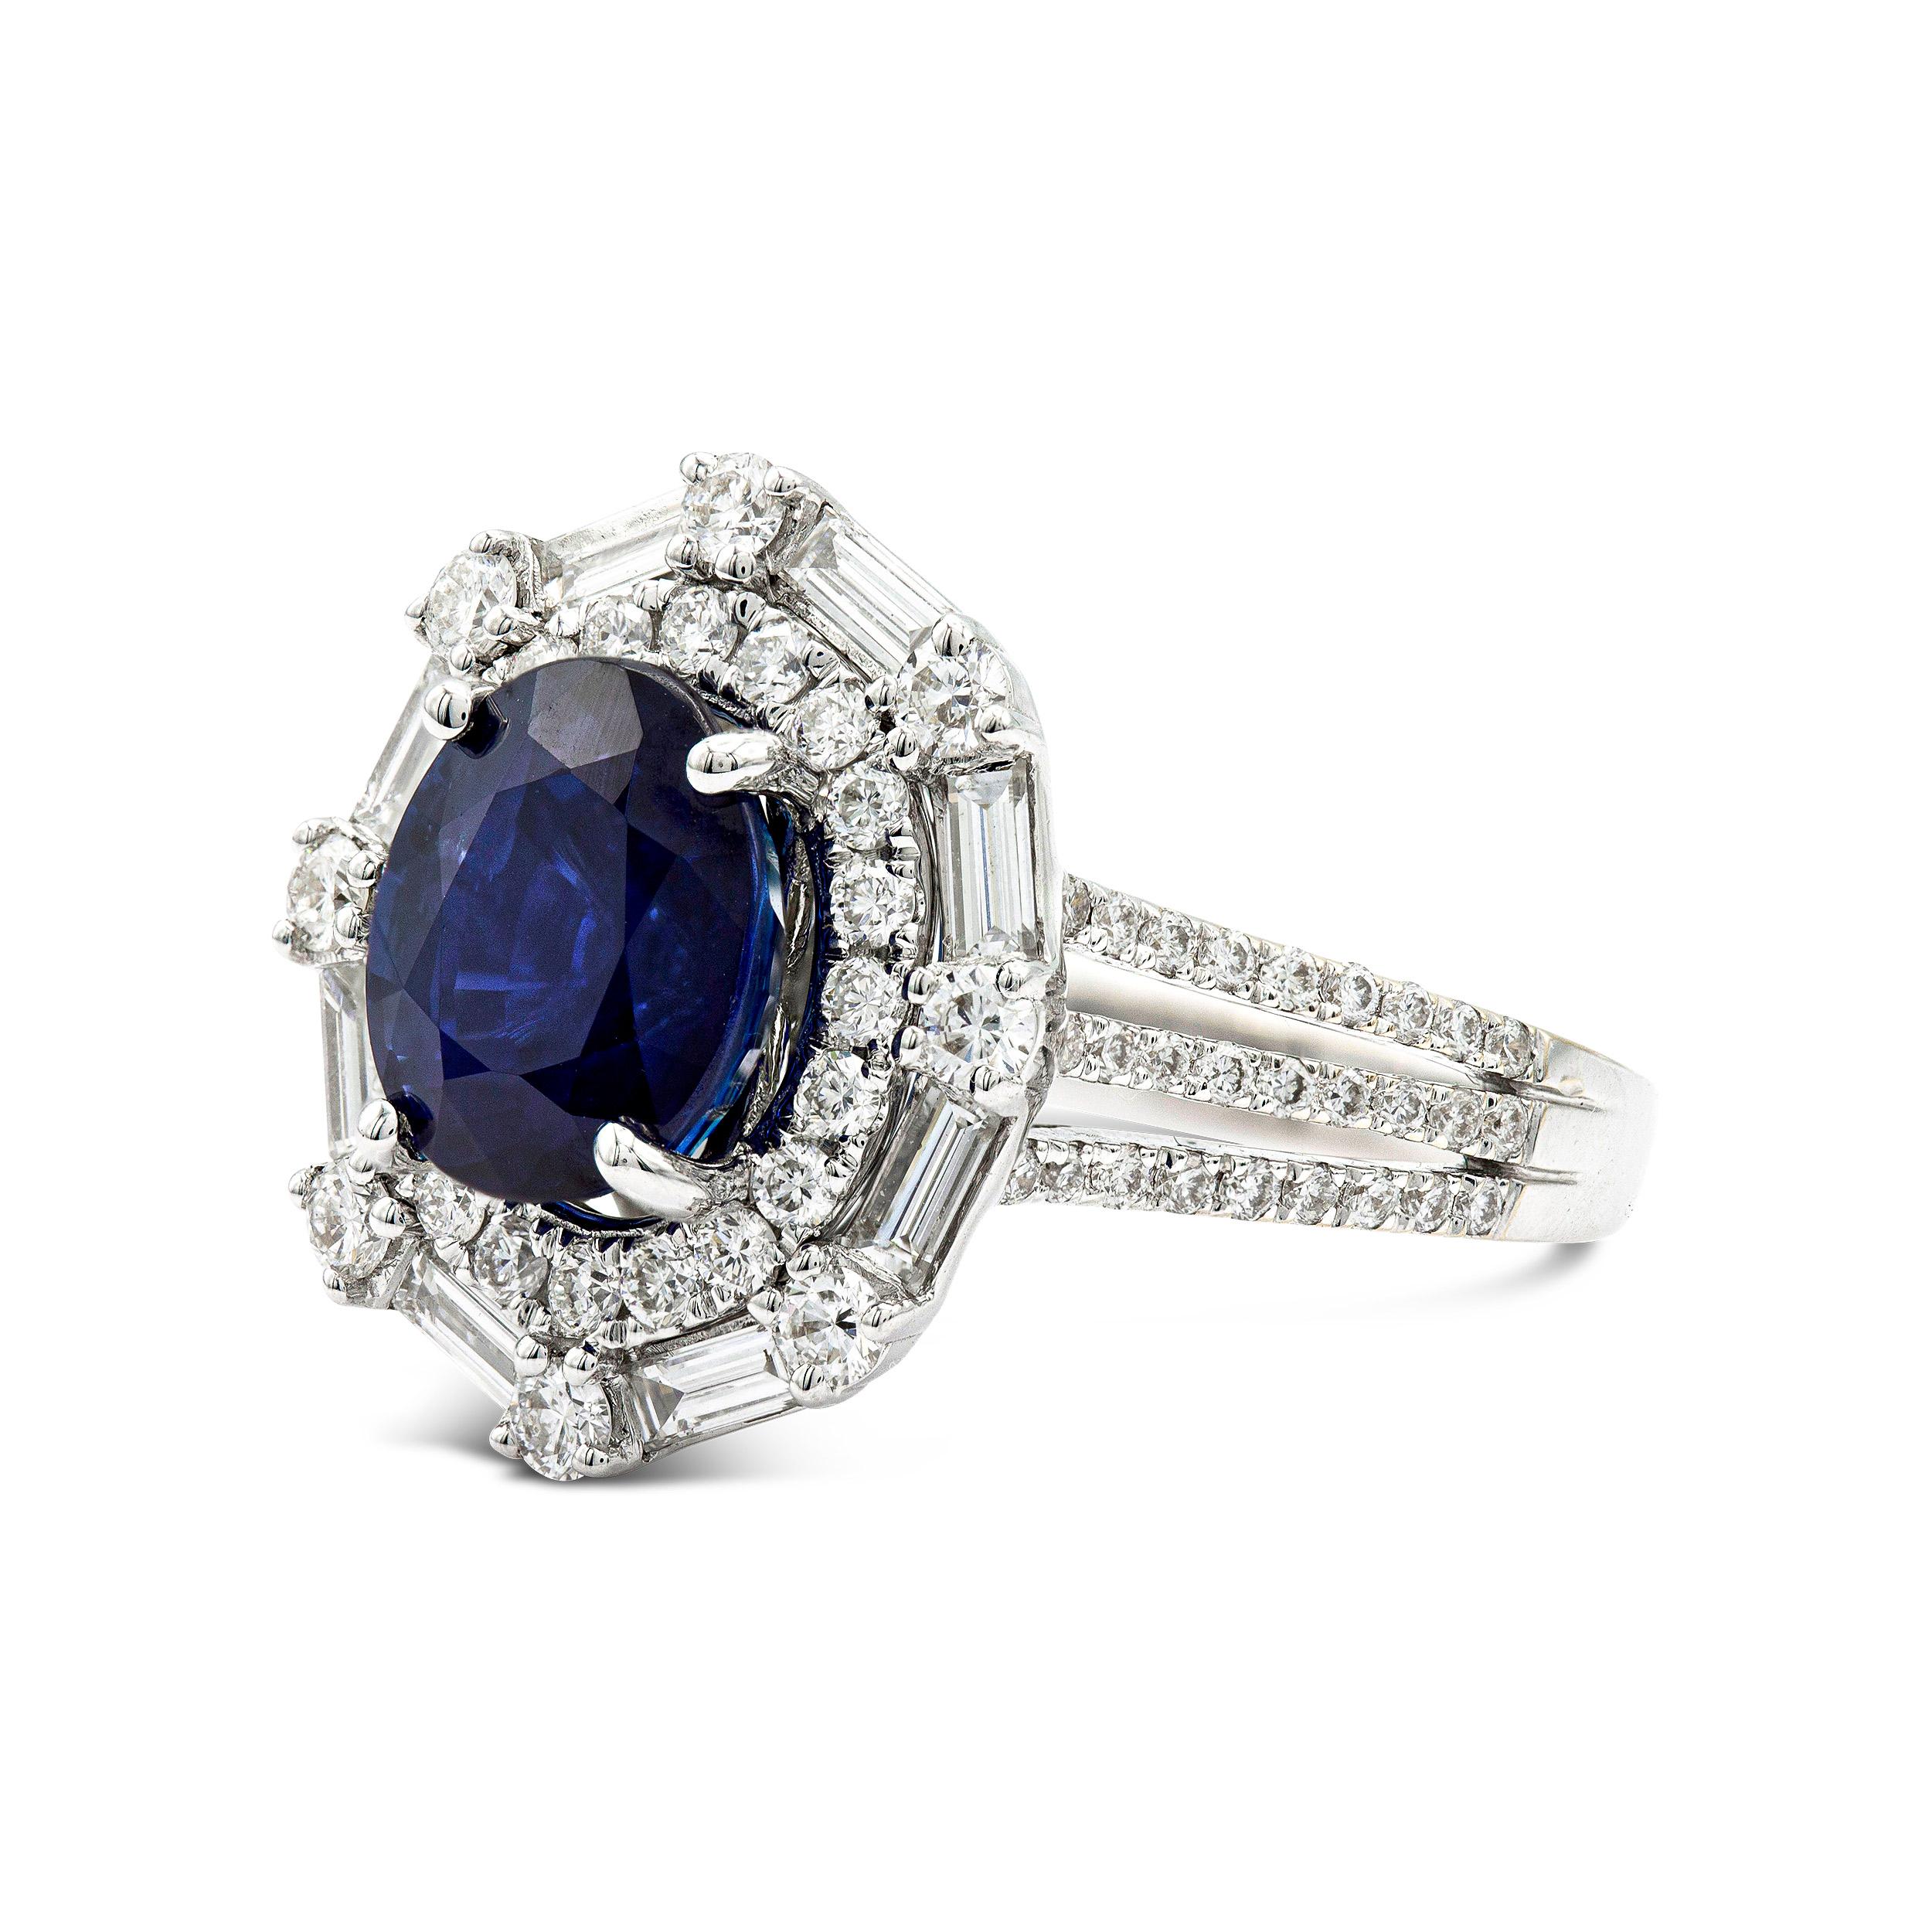 Get lost in the stunningly rich blue color of this 3.70-carat oval sapphire. A double halo of scintillating white diamonds complements the gemstone brilliantly and we love the triple split design of the ring's shank. Wear this bold cocktail piece